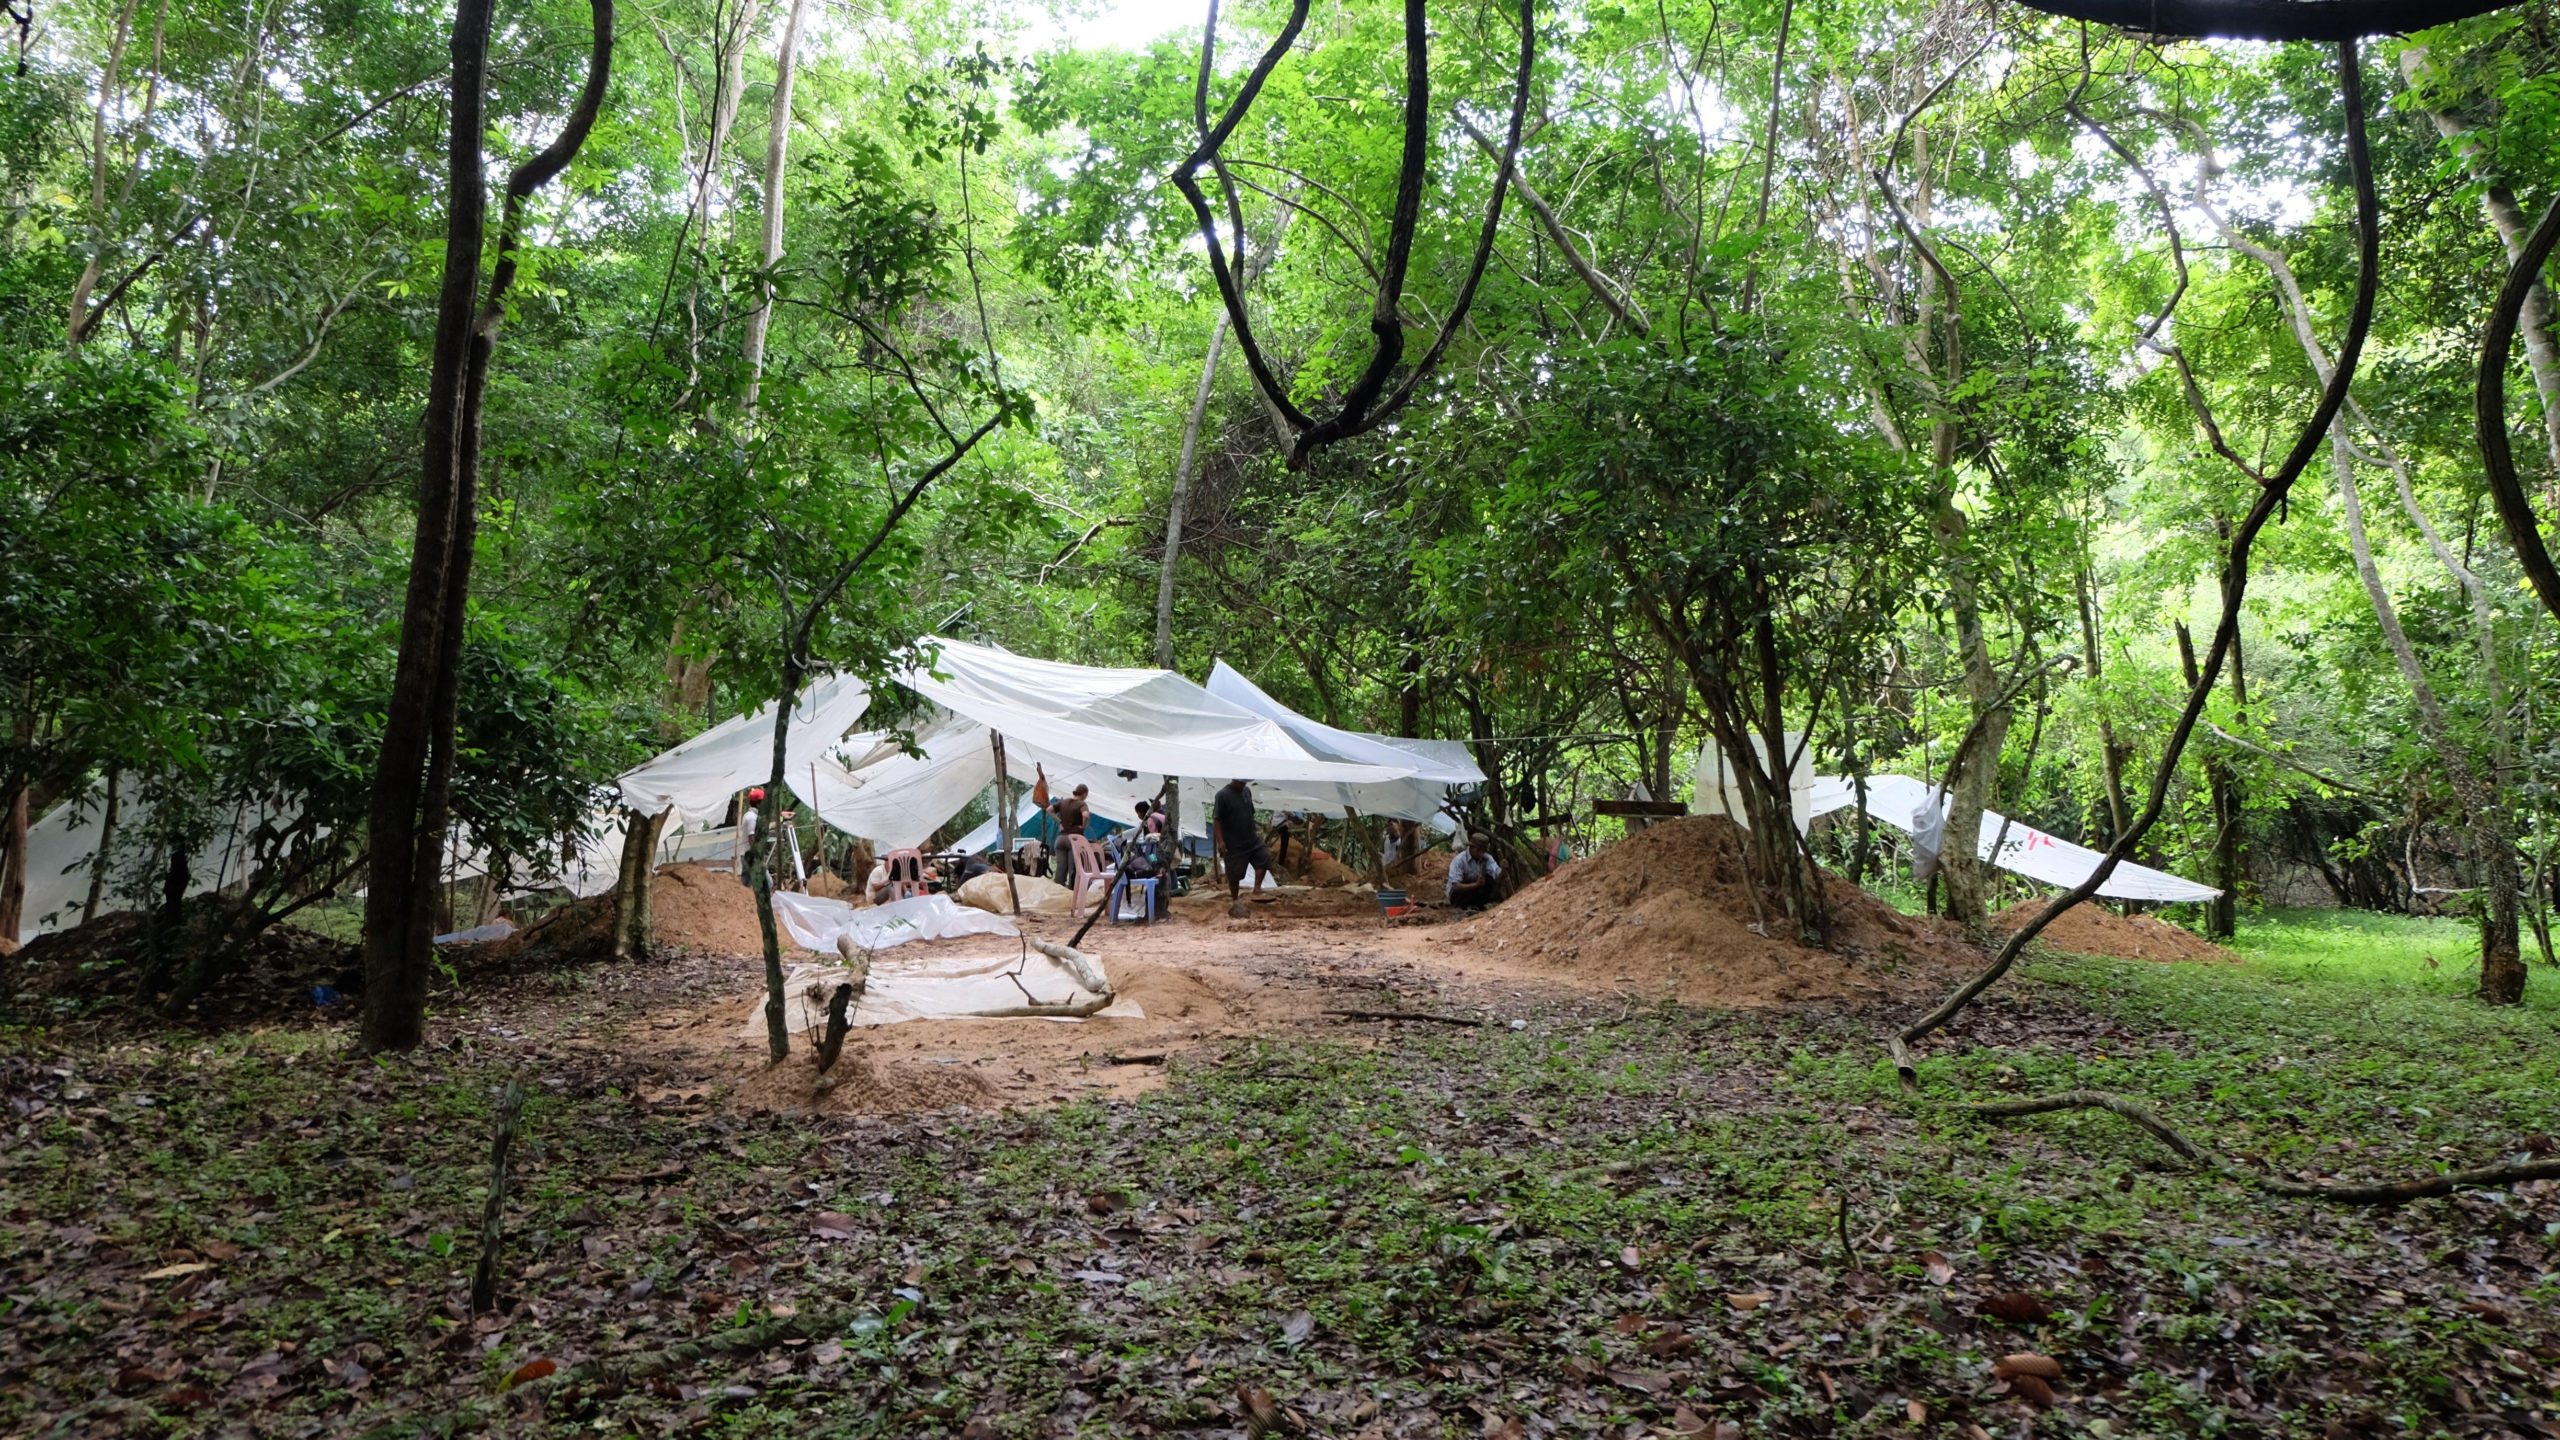 Excavation trenches within the trees at Angkor Wat. (Image: Alison Carter)